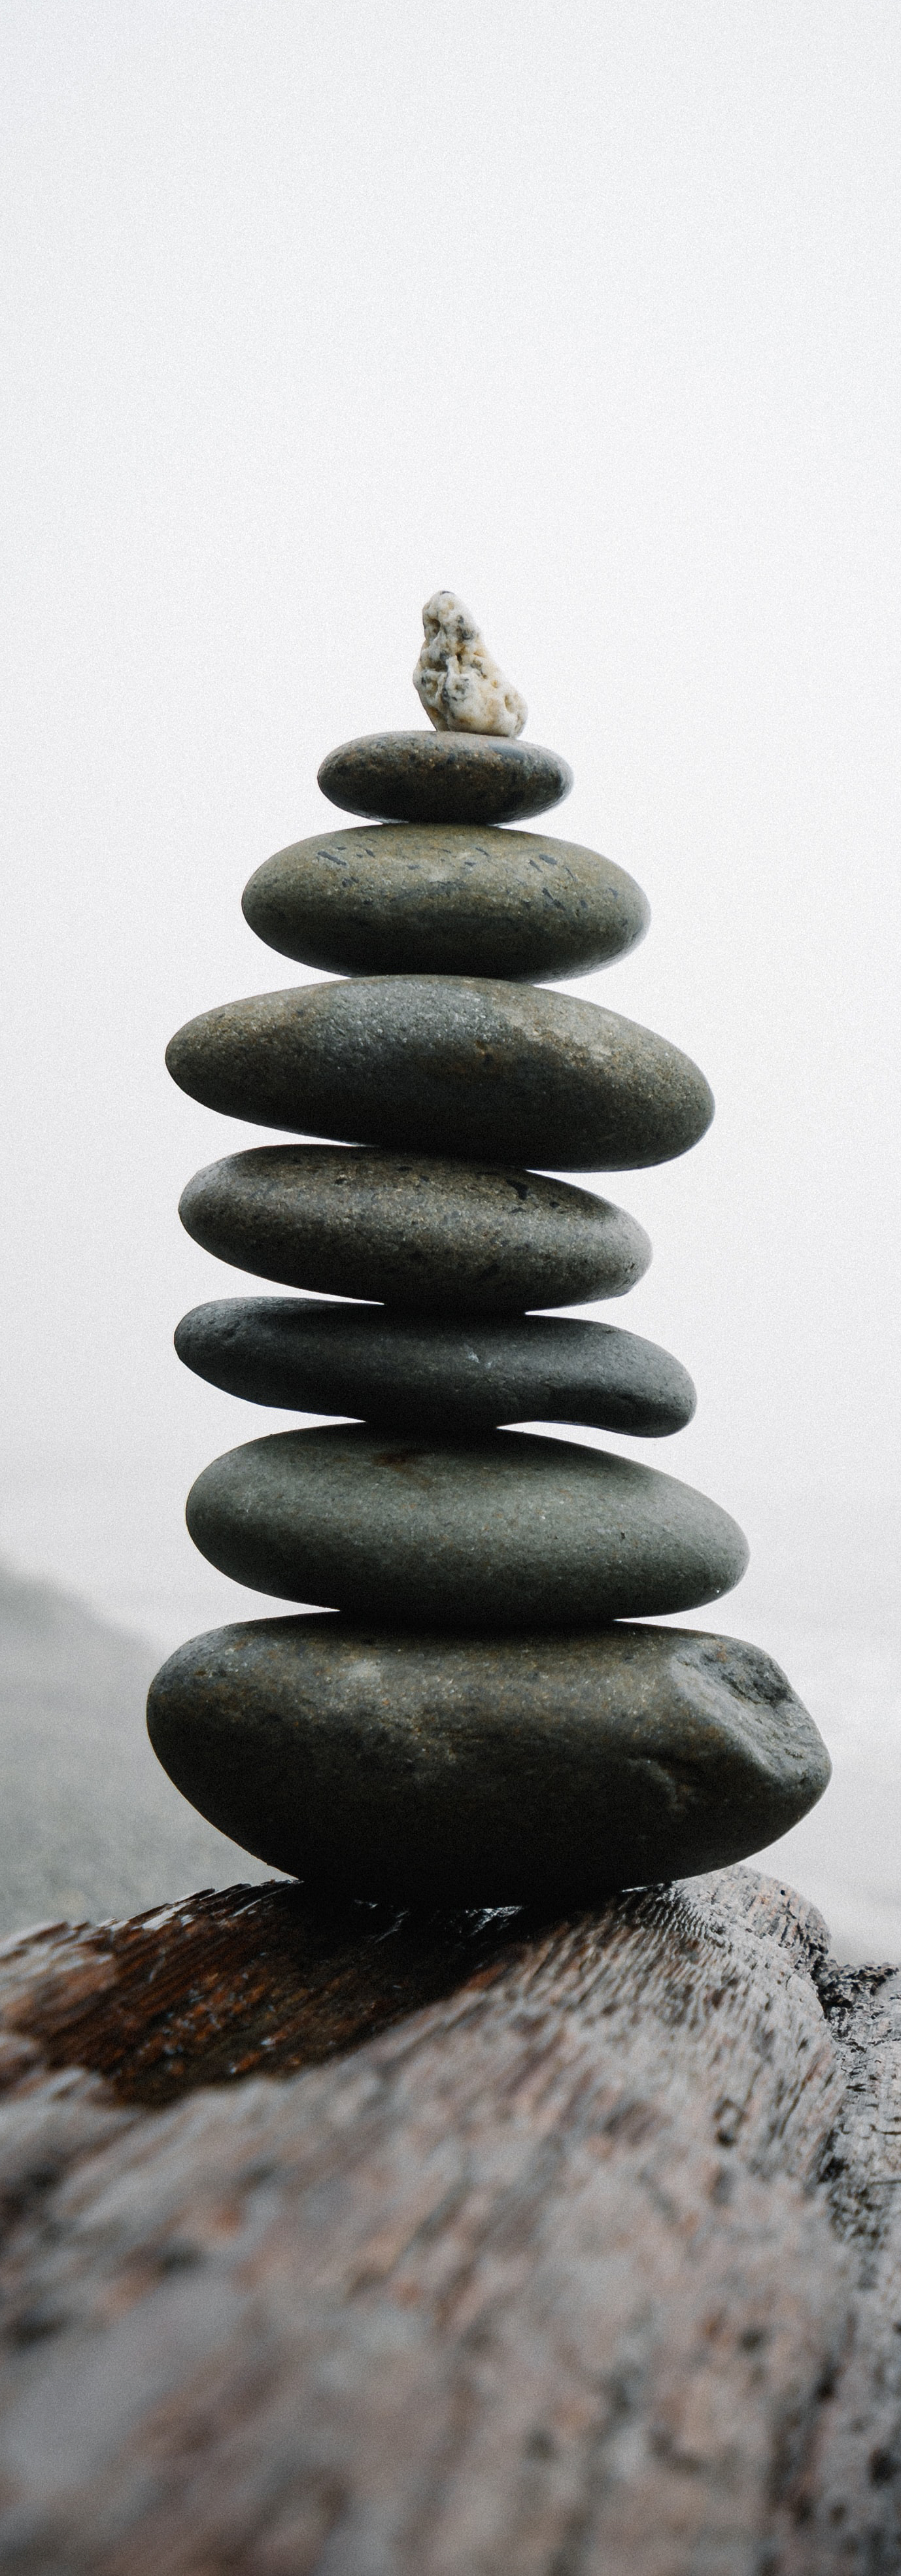 Smooth, round rocks balanced carefully on top of each other